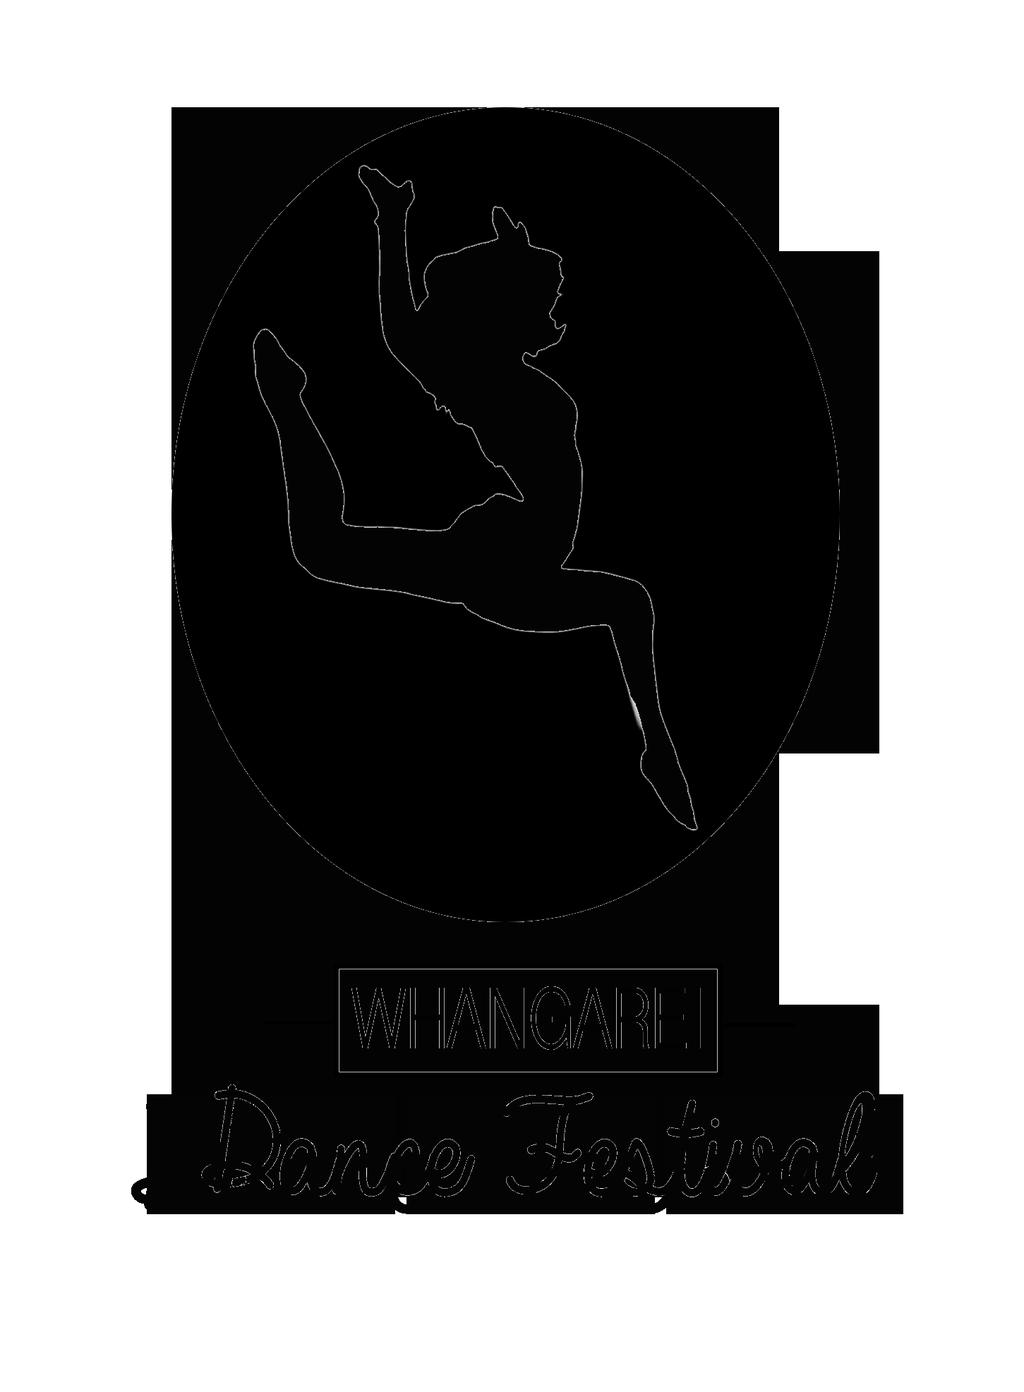 FRIDAY 3RD - SUNDAY 5TH AUGUST 2018 FORUM NORTH WHANGAREI Adjudicator: Alicia Chadwick-Cook AISTD, Dip Theatre Arts & Dip Teachers of Dance Alicia has been dancing since the age of three.